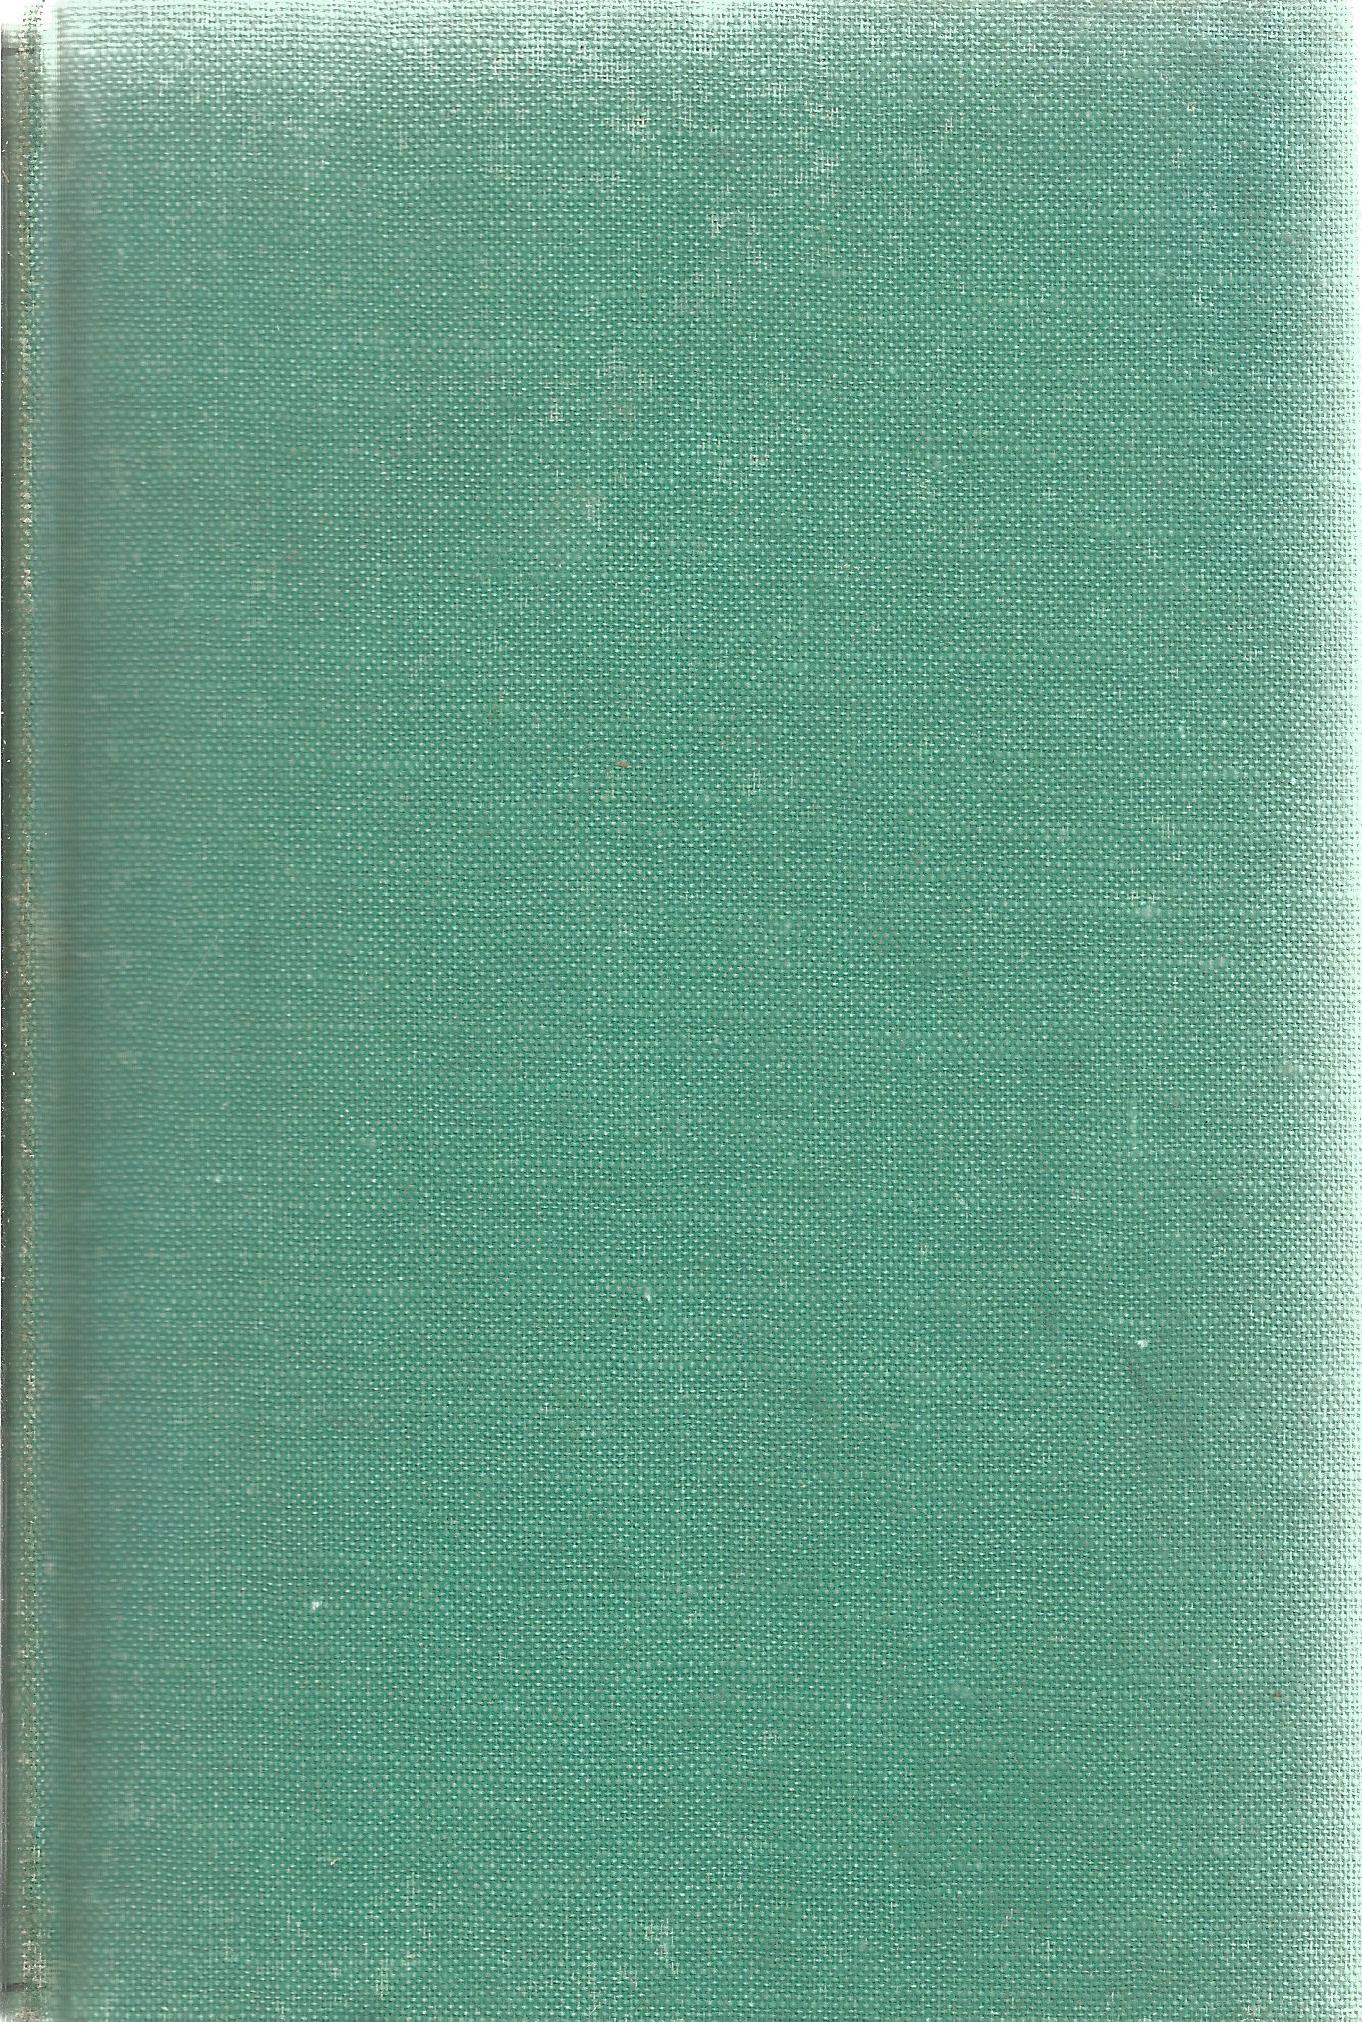 Keats Poems Published in 1820 edited by M Robertson 1959 Hardback Book published by Oxford At The